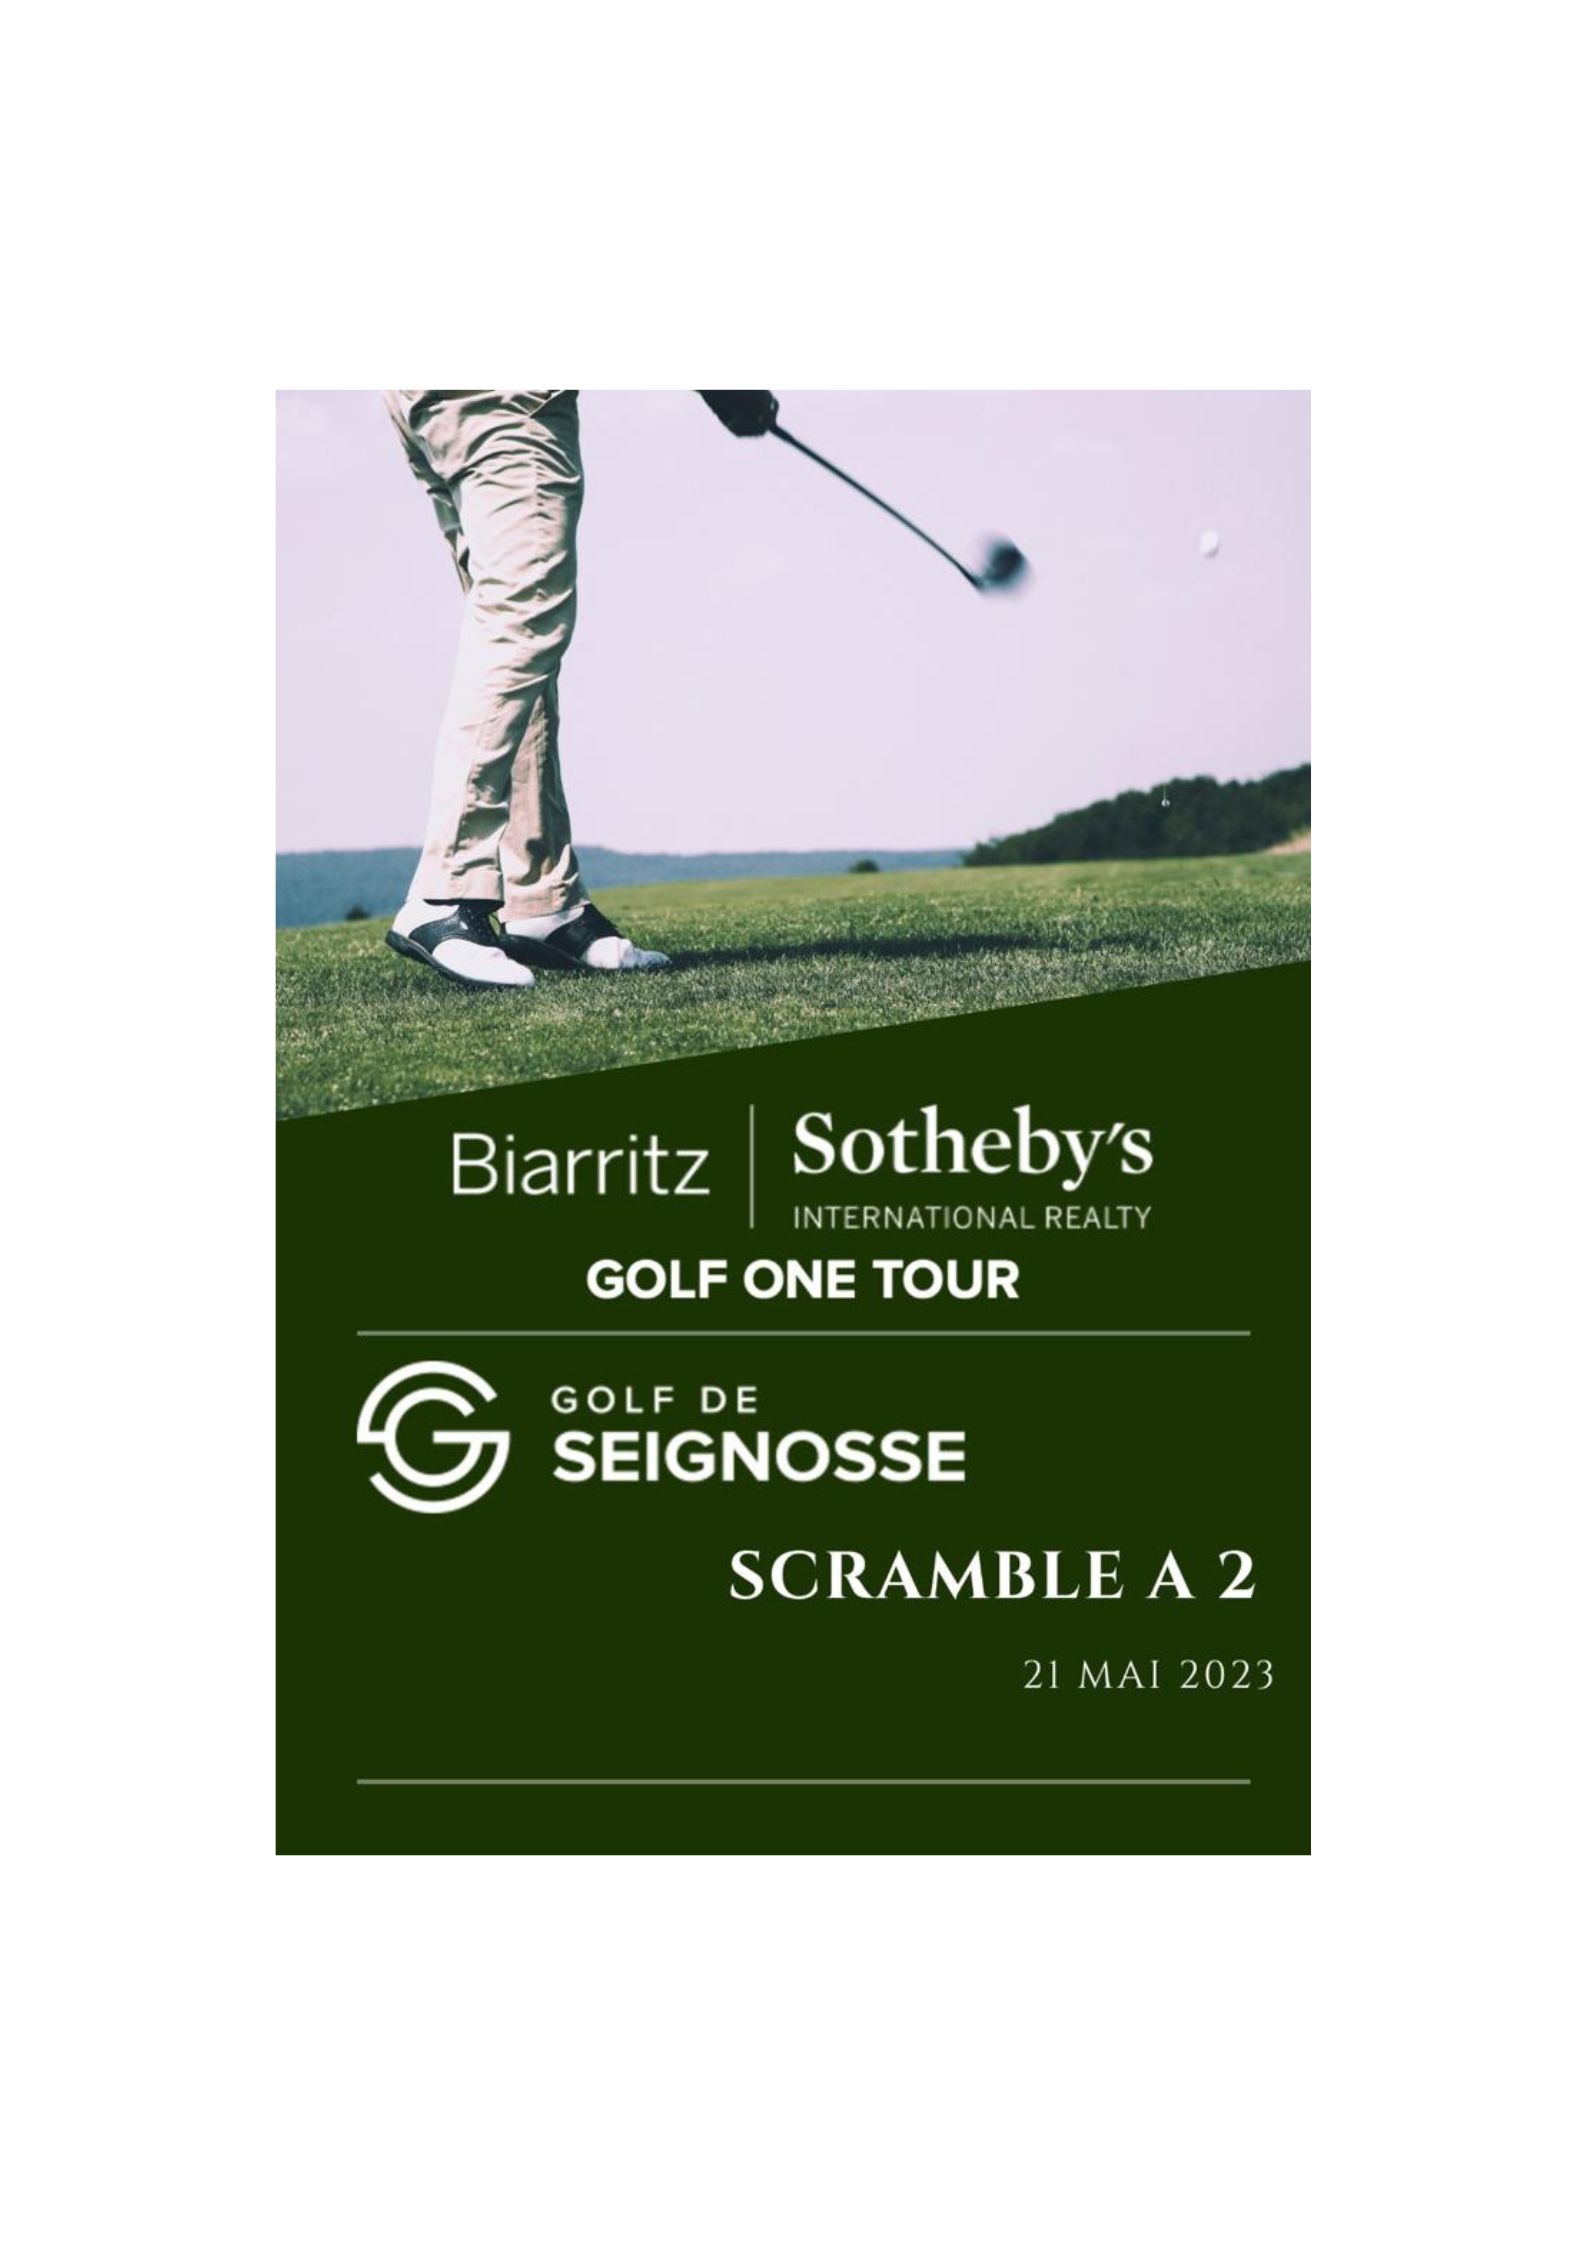 Sotheby's Golf One Tour